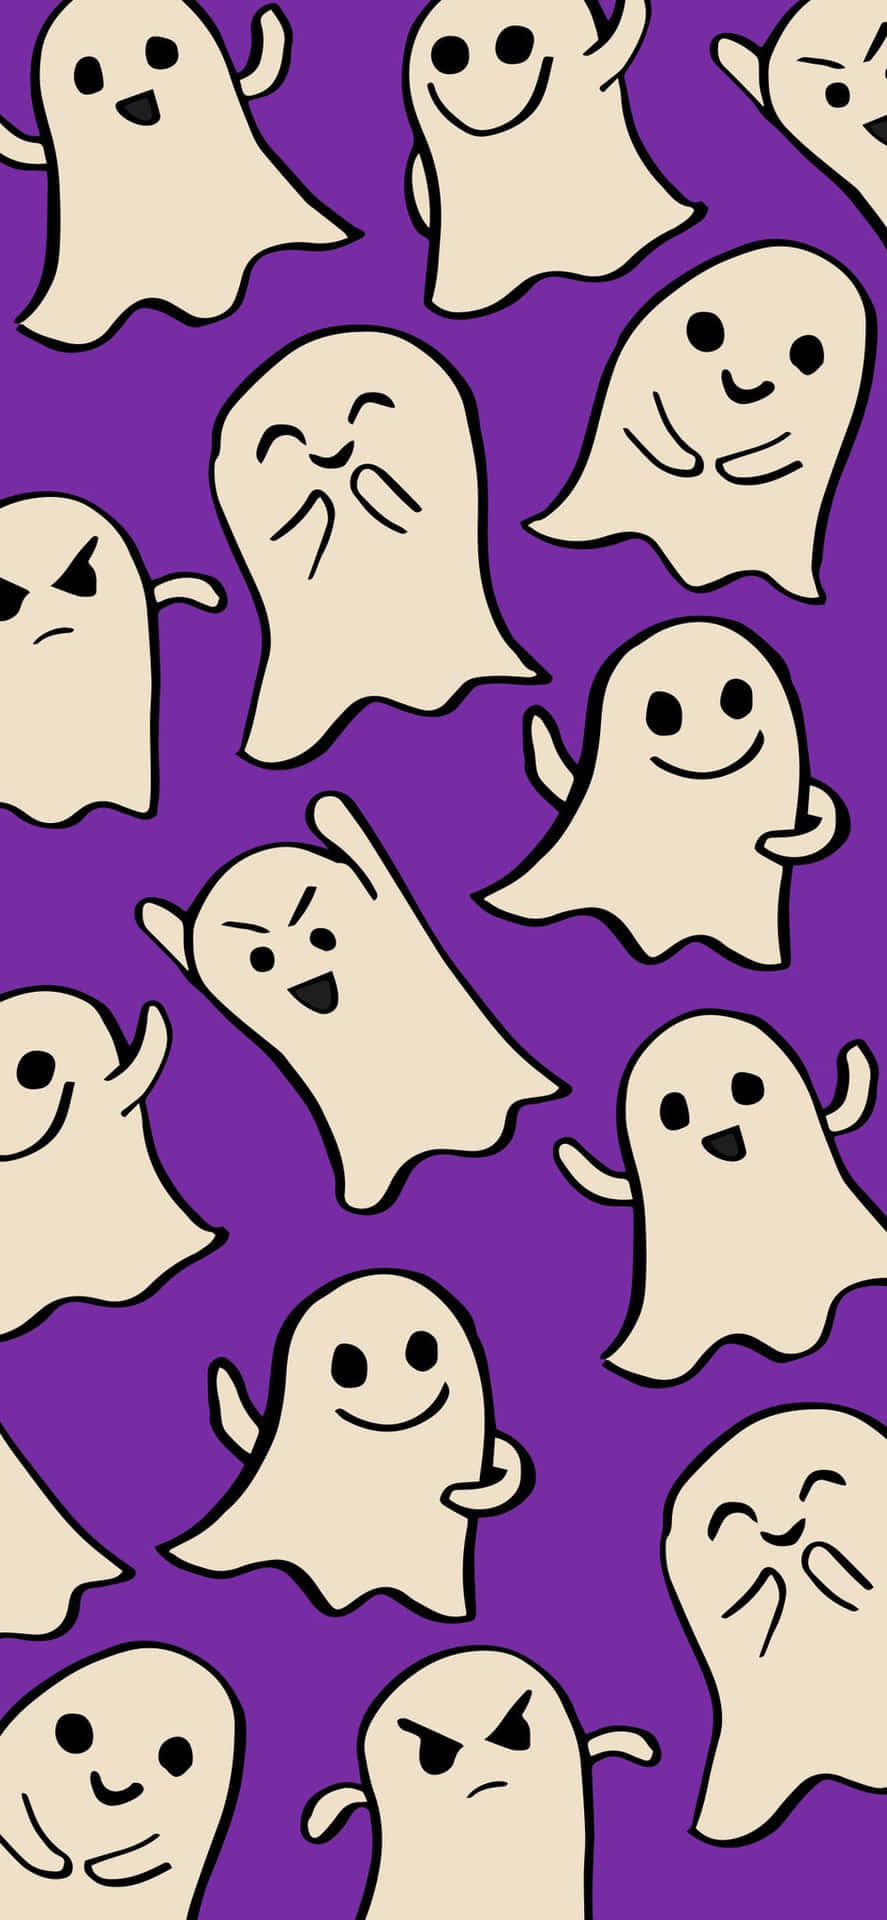 Get into the Halloween Spirit with a Spooky Phone background